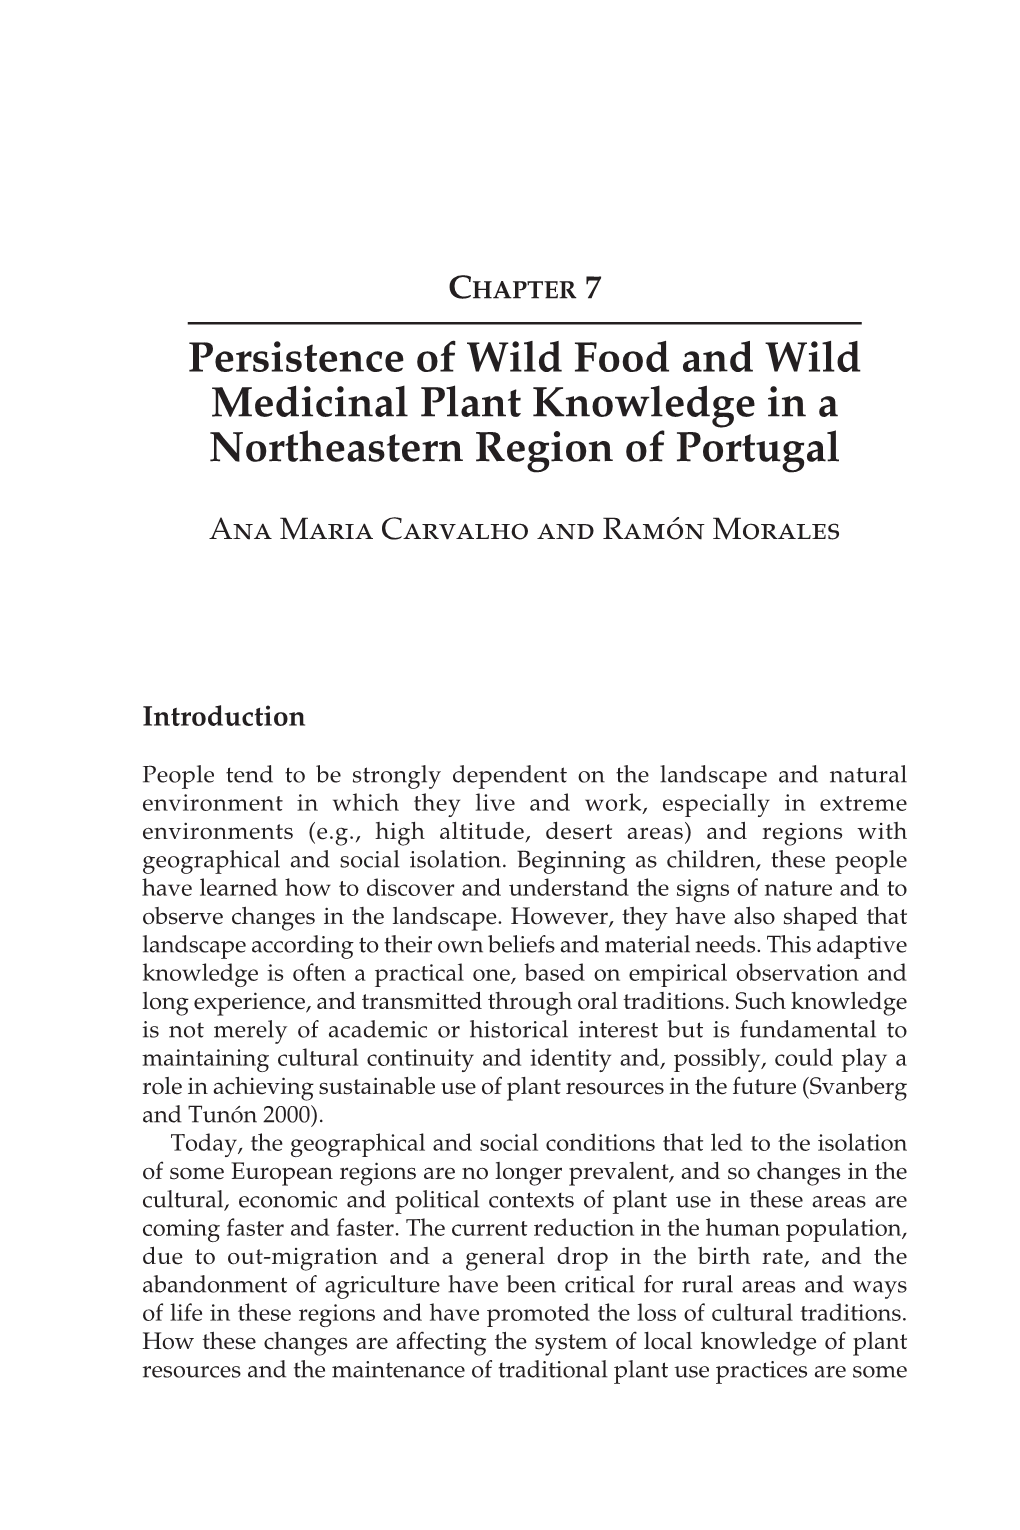 Persistence of Wild Food and Wild Medicinal Plant Knowledge in a Northeastern Region of Portugal